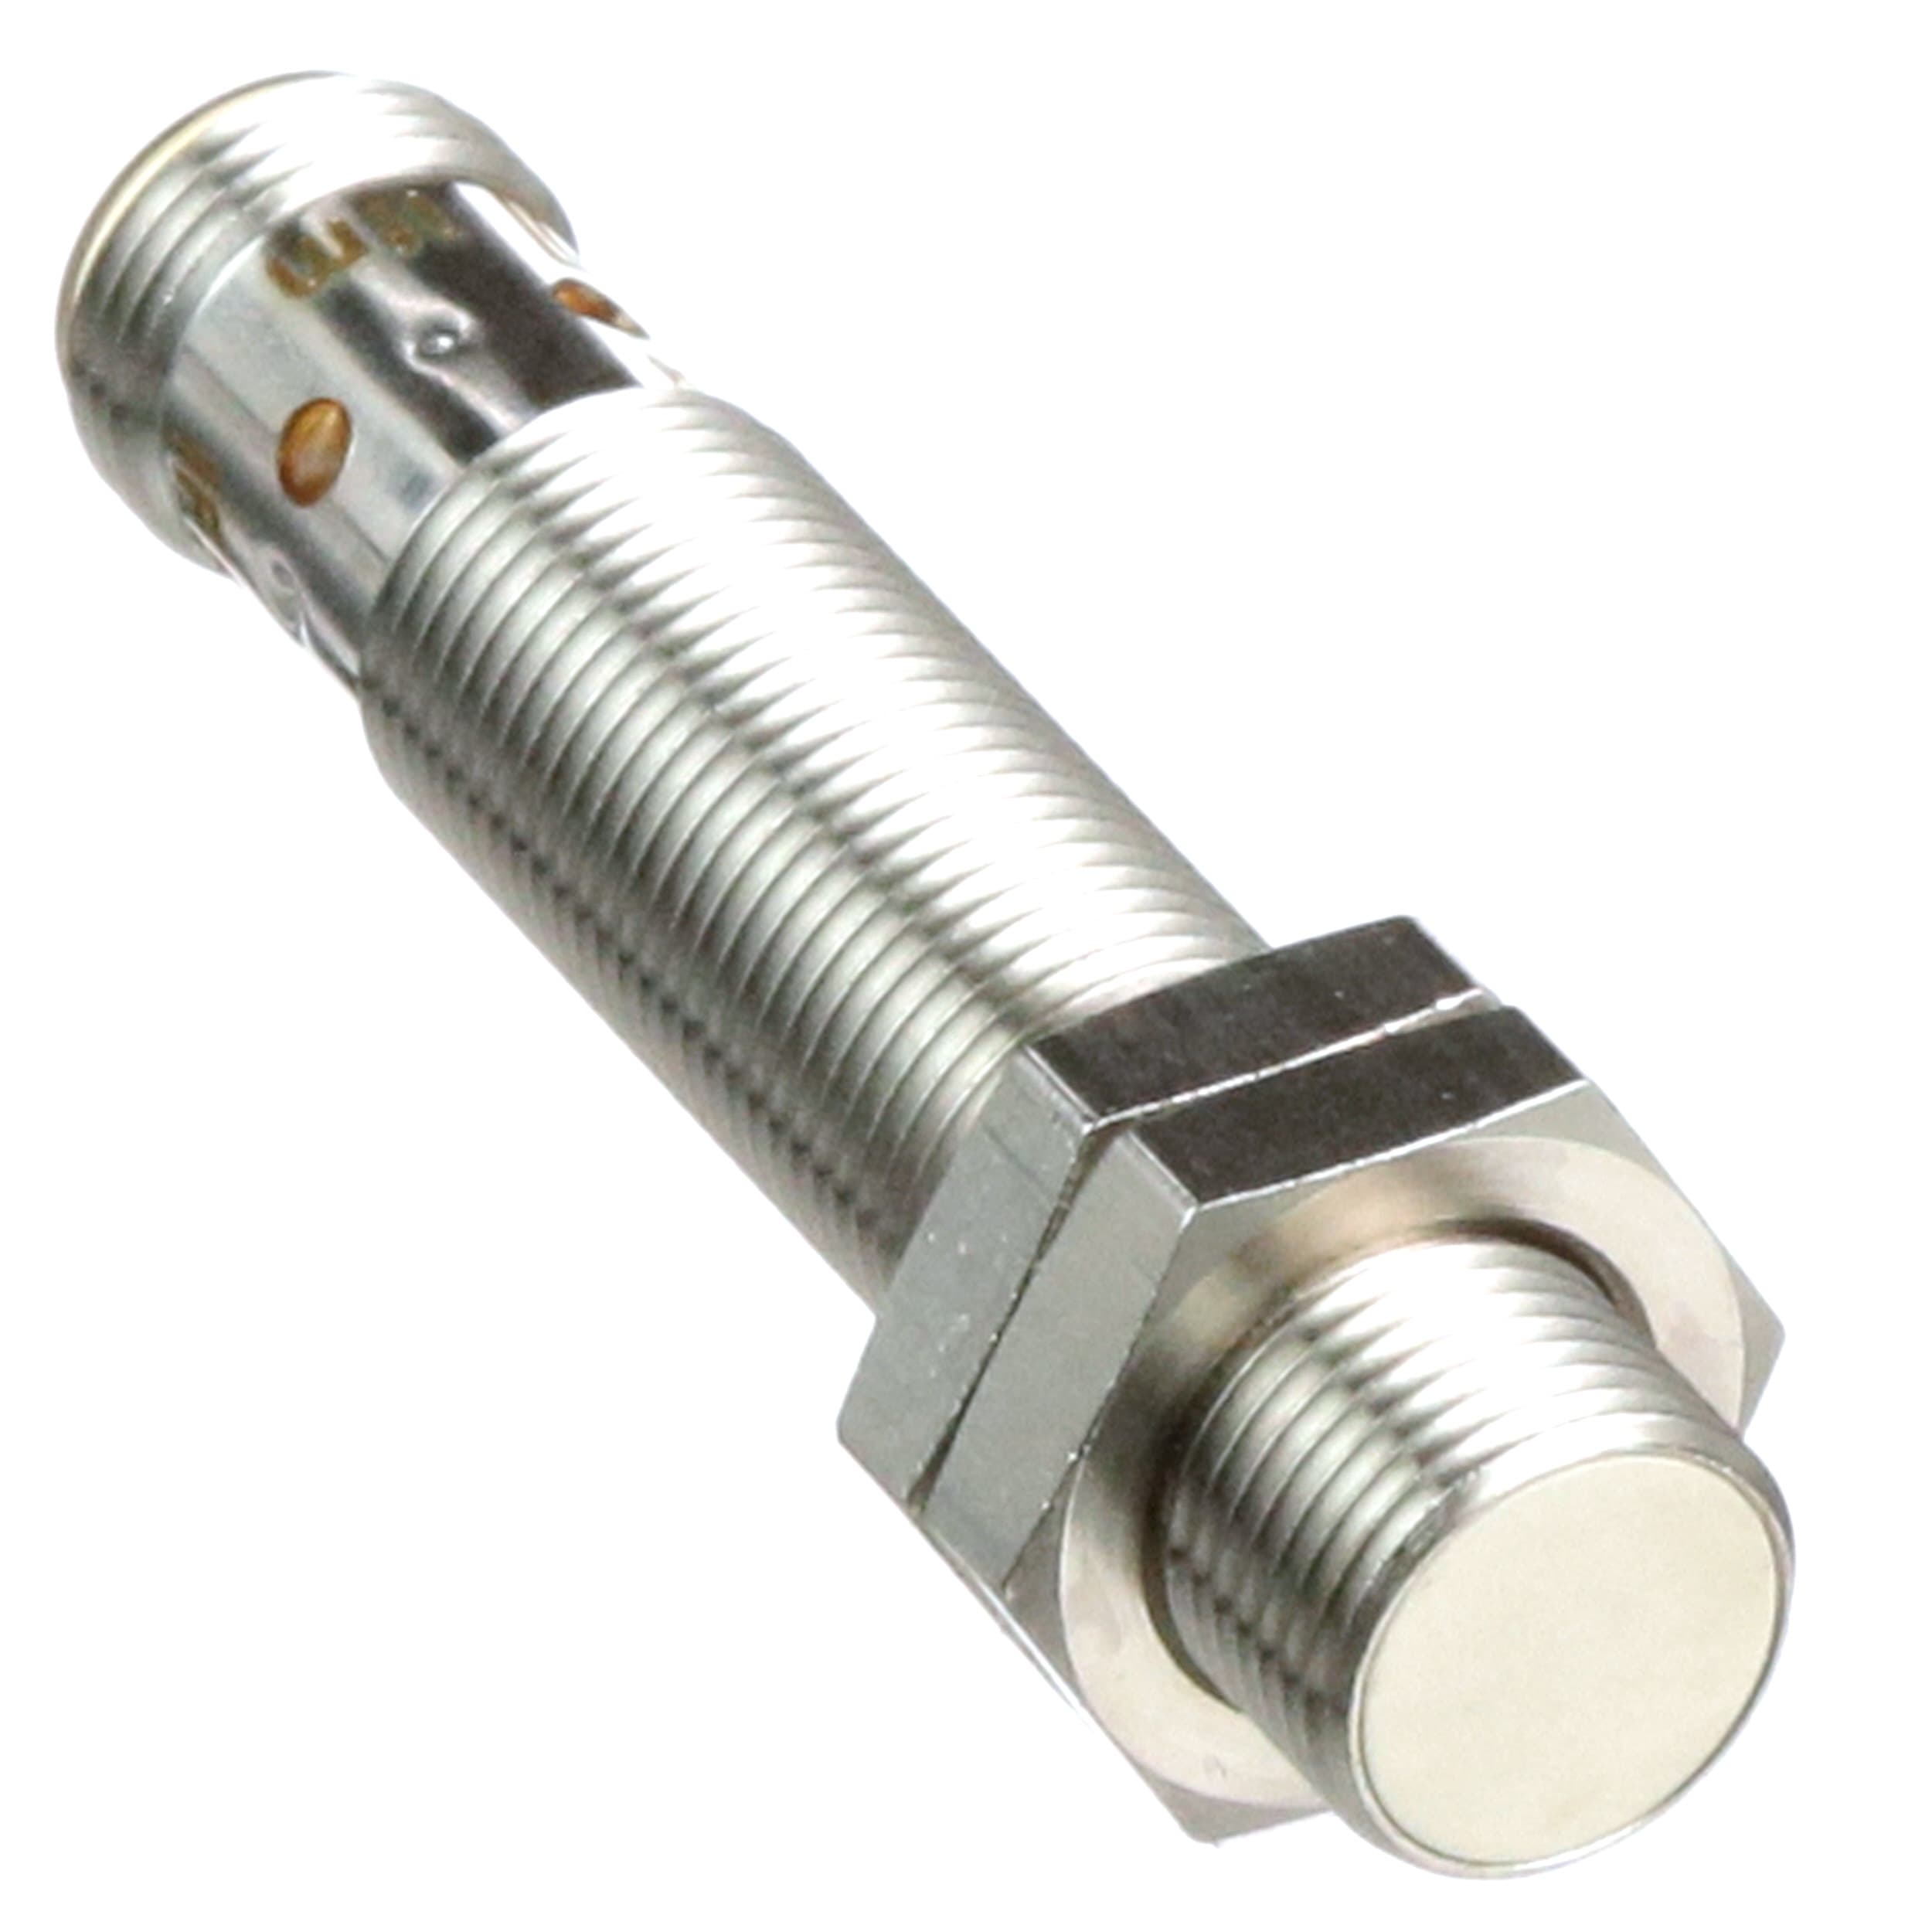 Details about   IFM EFECTOR IF5720 INDUCTIVE PROXIMITY SENSOR USED * 